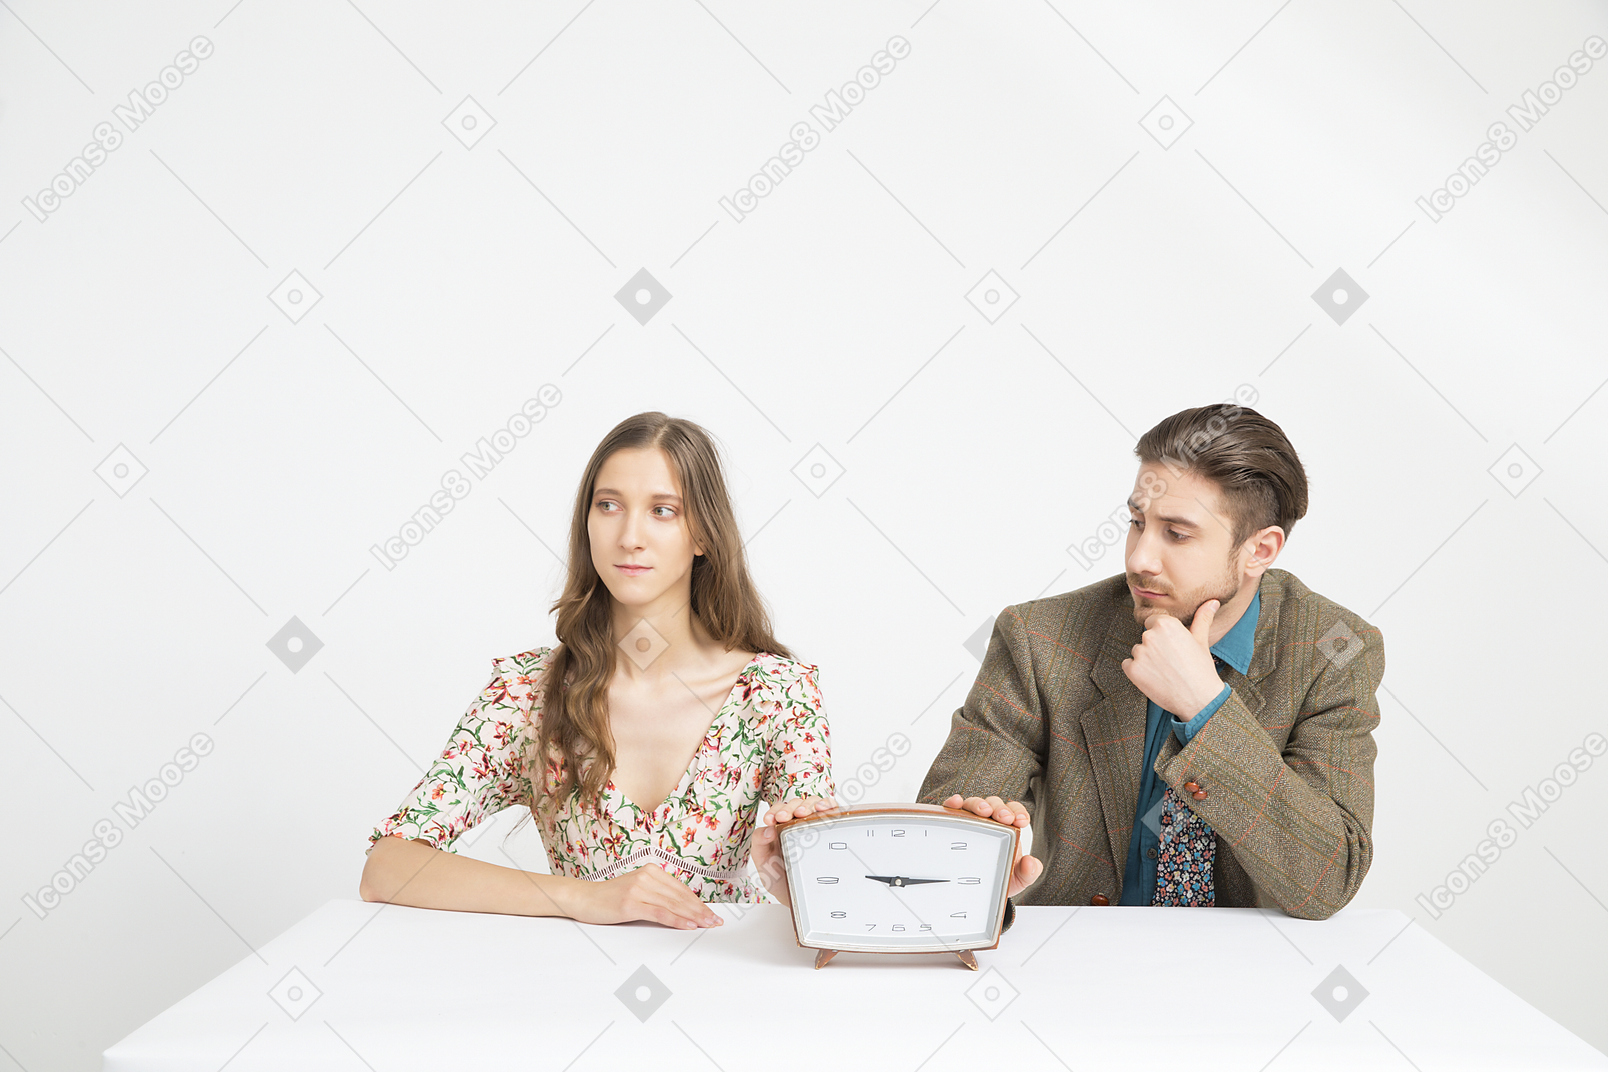 Couple sitting at the table and holding clock